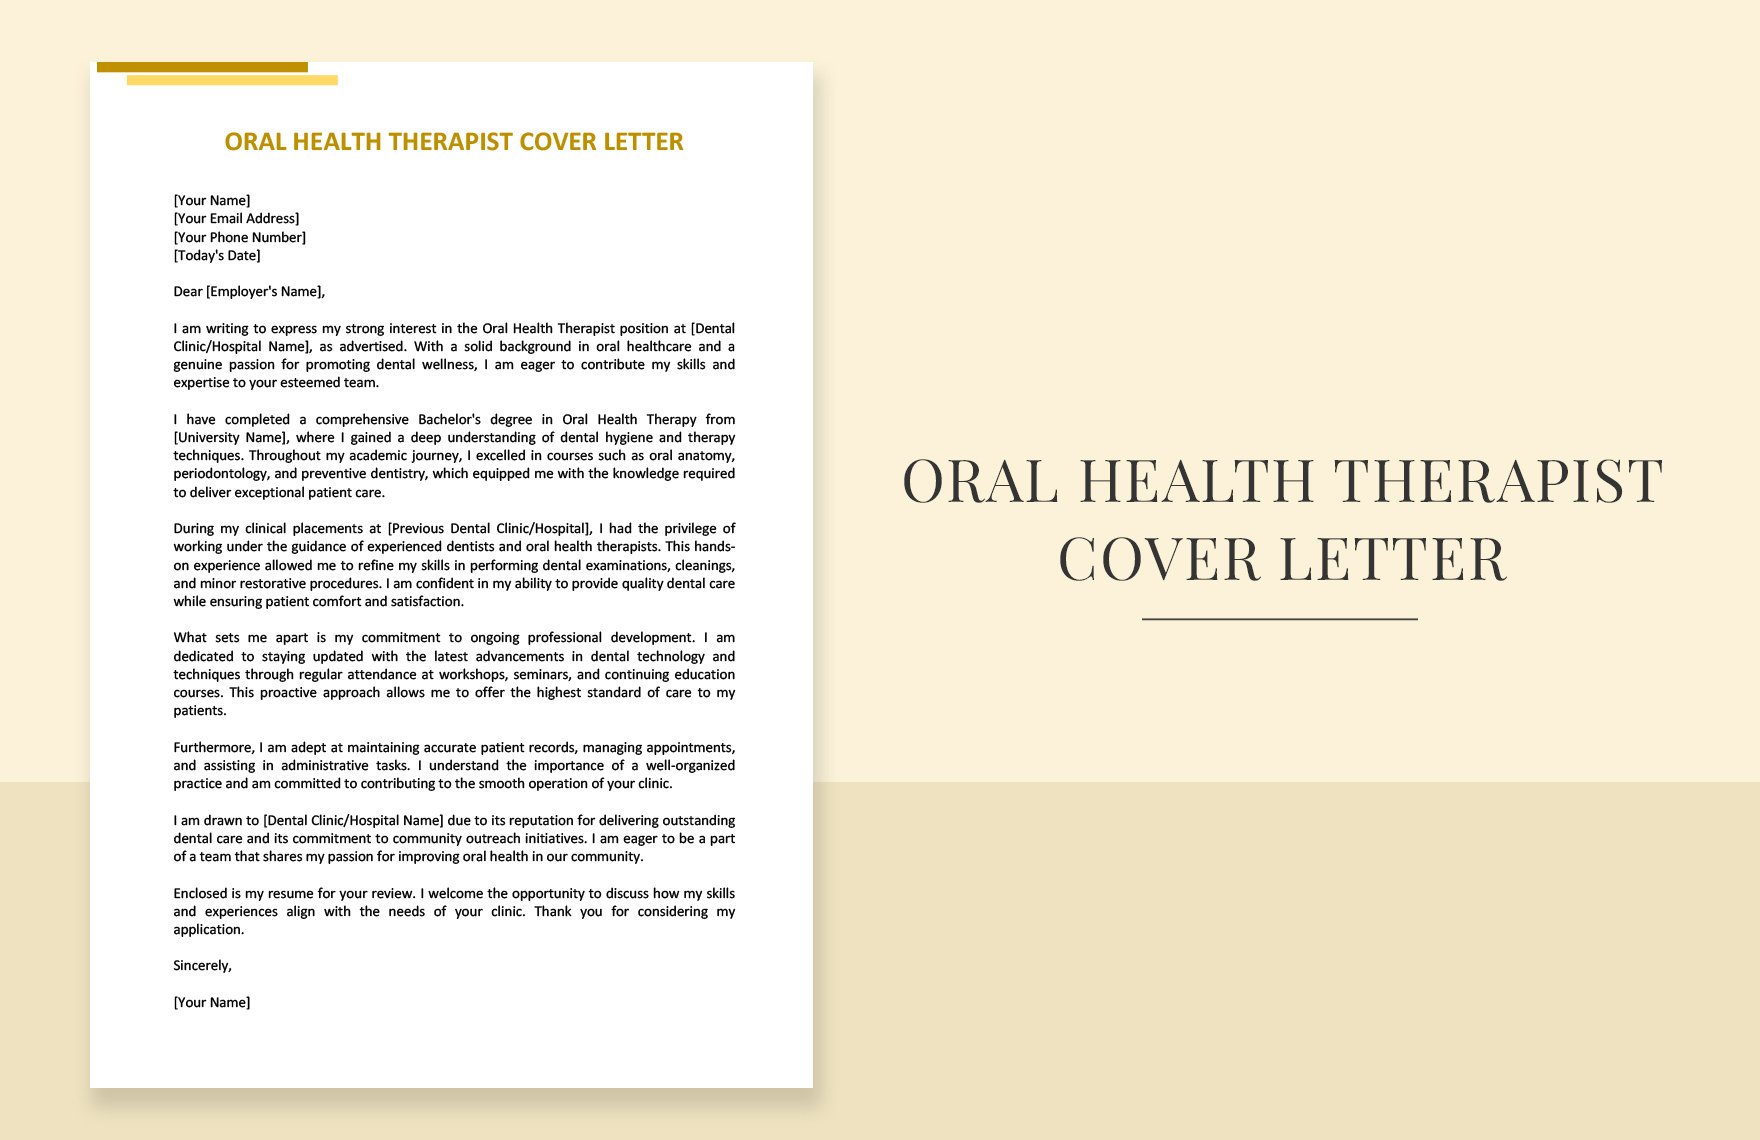 Oral Health Therapist Cover Letter in Word, Google Docs